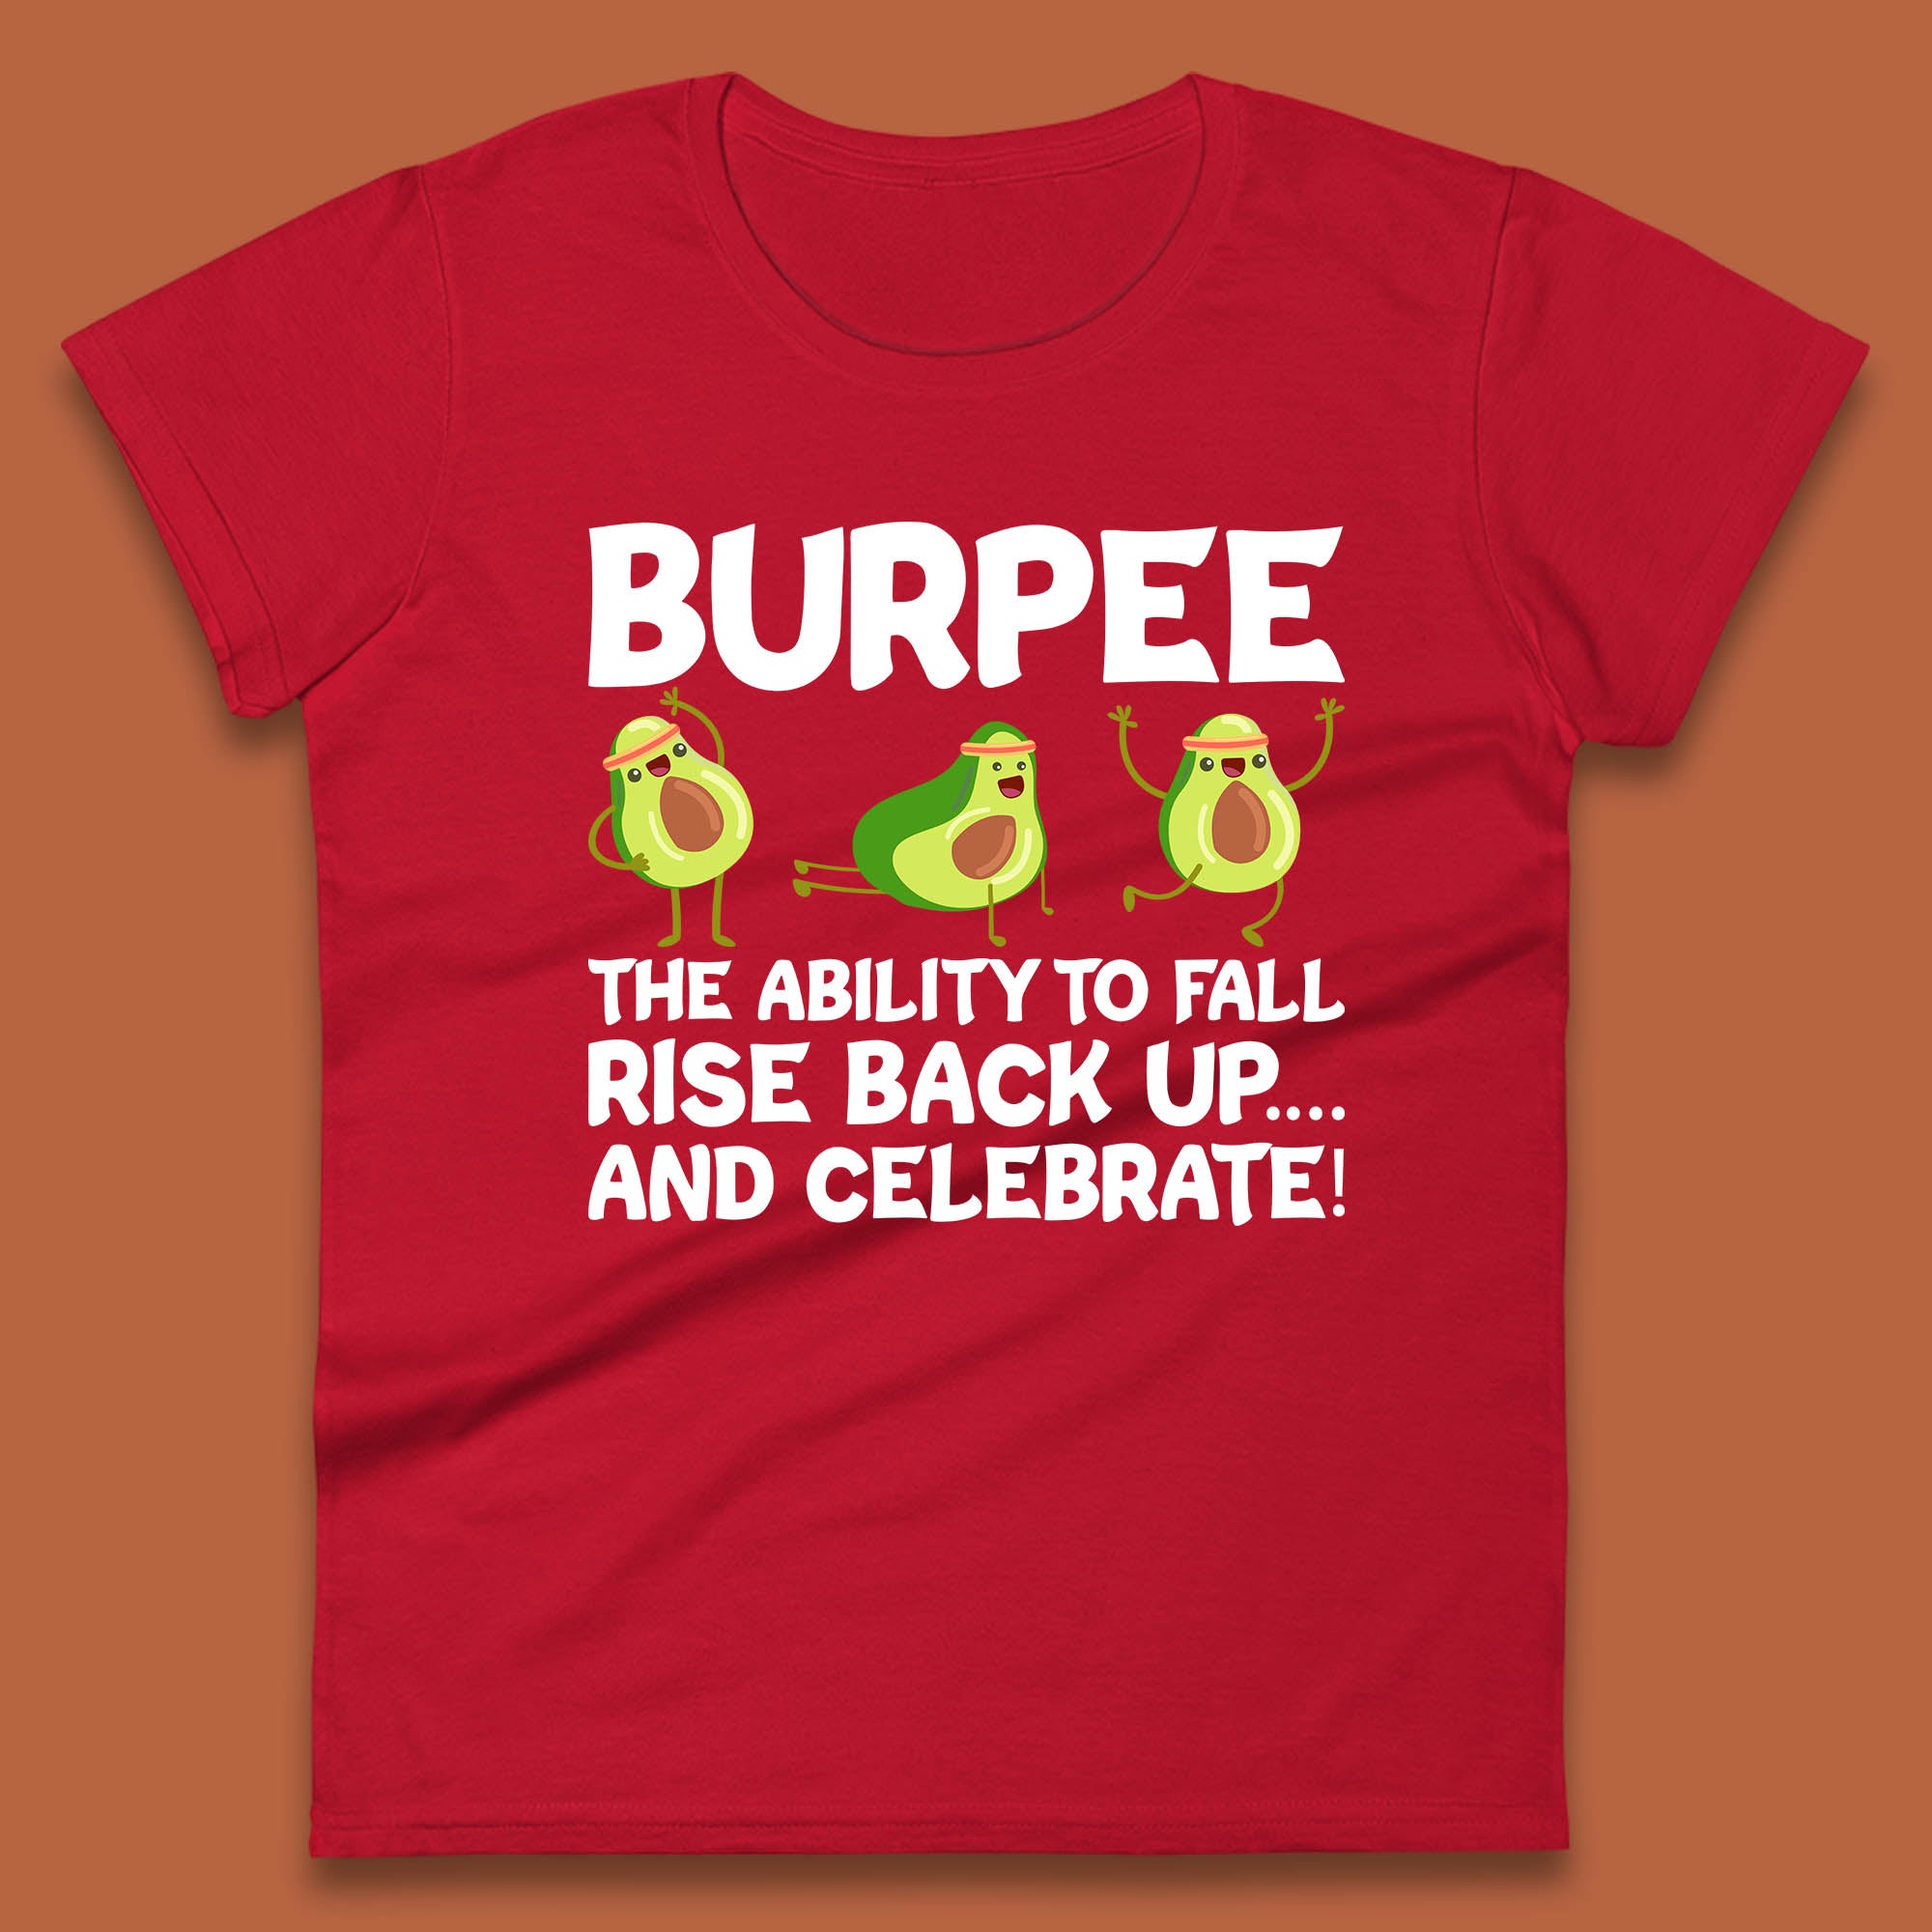 Burpee Avocado Fitness Enthusiasts Burpee The Ability To Fall Rise Back Up And Celebrate Womens Tee Top